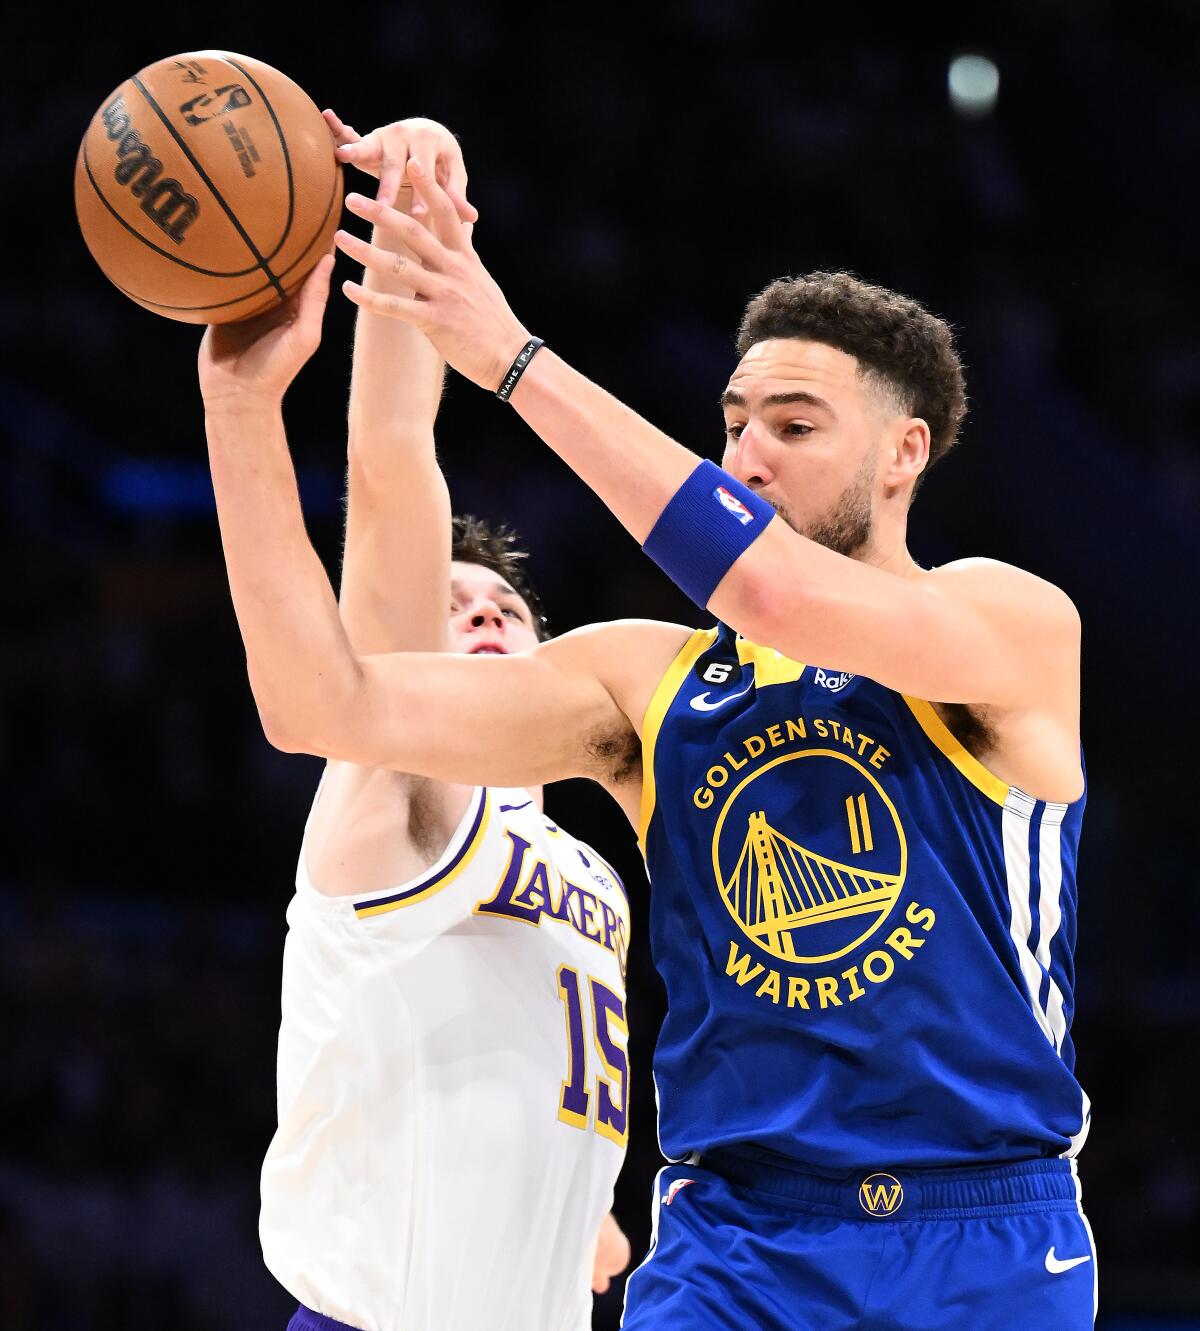 Lakers guard Austin Reaves blocks the shot of Warriors guard Klay Thompson during Game 3.